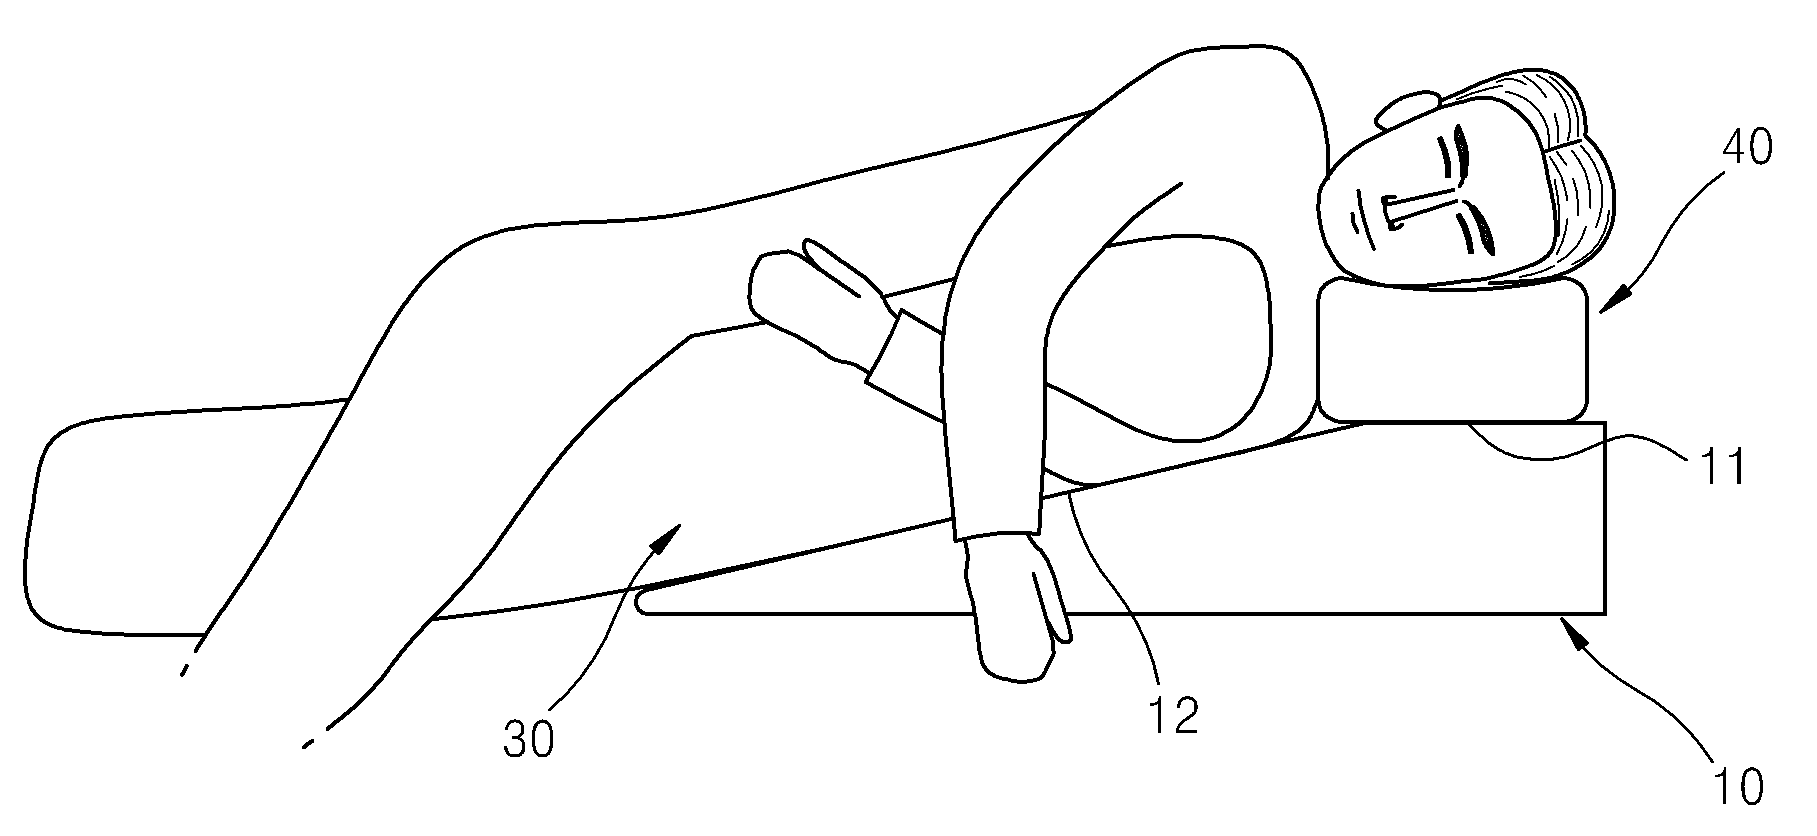 Sleeping posture supporting apparatus